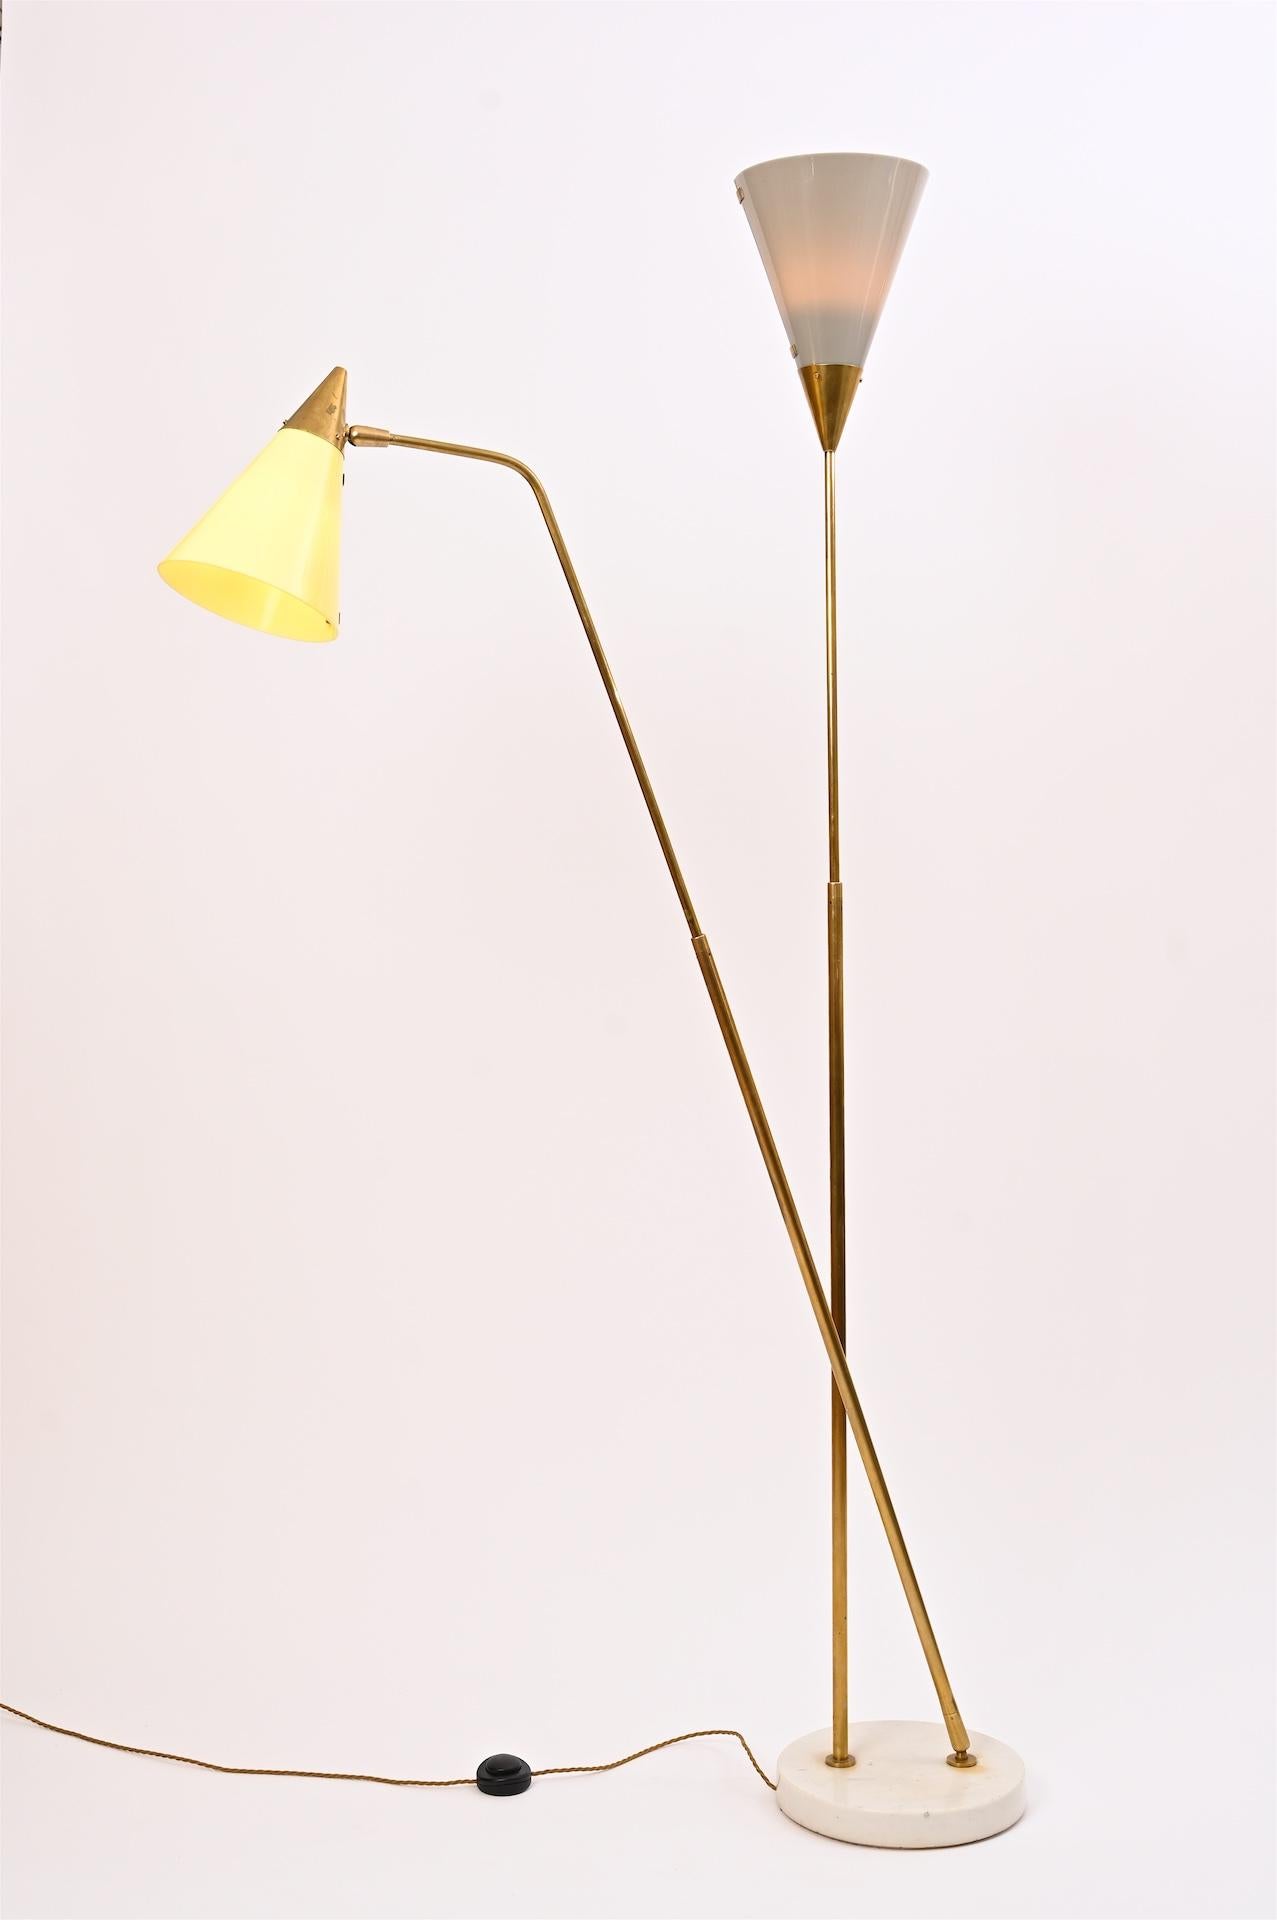 Elegant two light adjustable floor lamp by Guiseppe Osuni for Oluce

Beautiful colours to the shades. One pastel grey the other a pastel yellow.
 